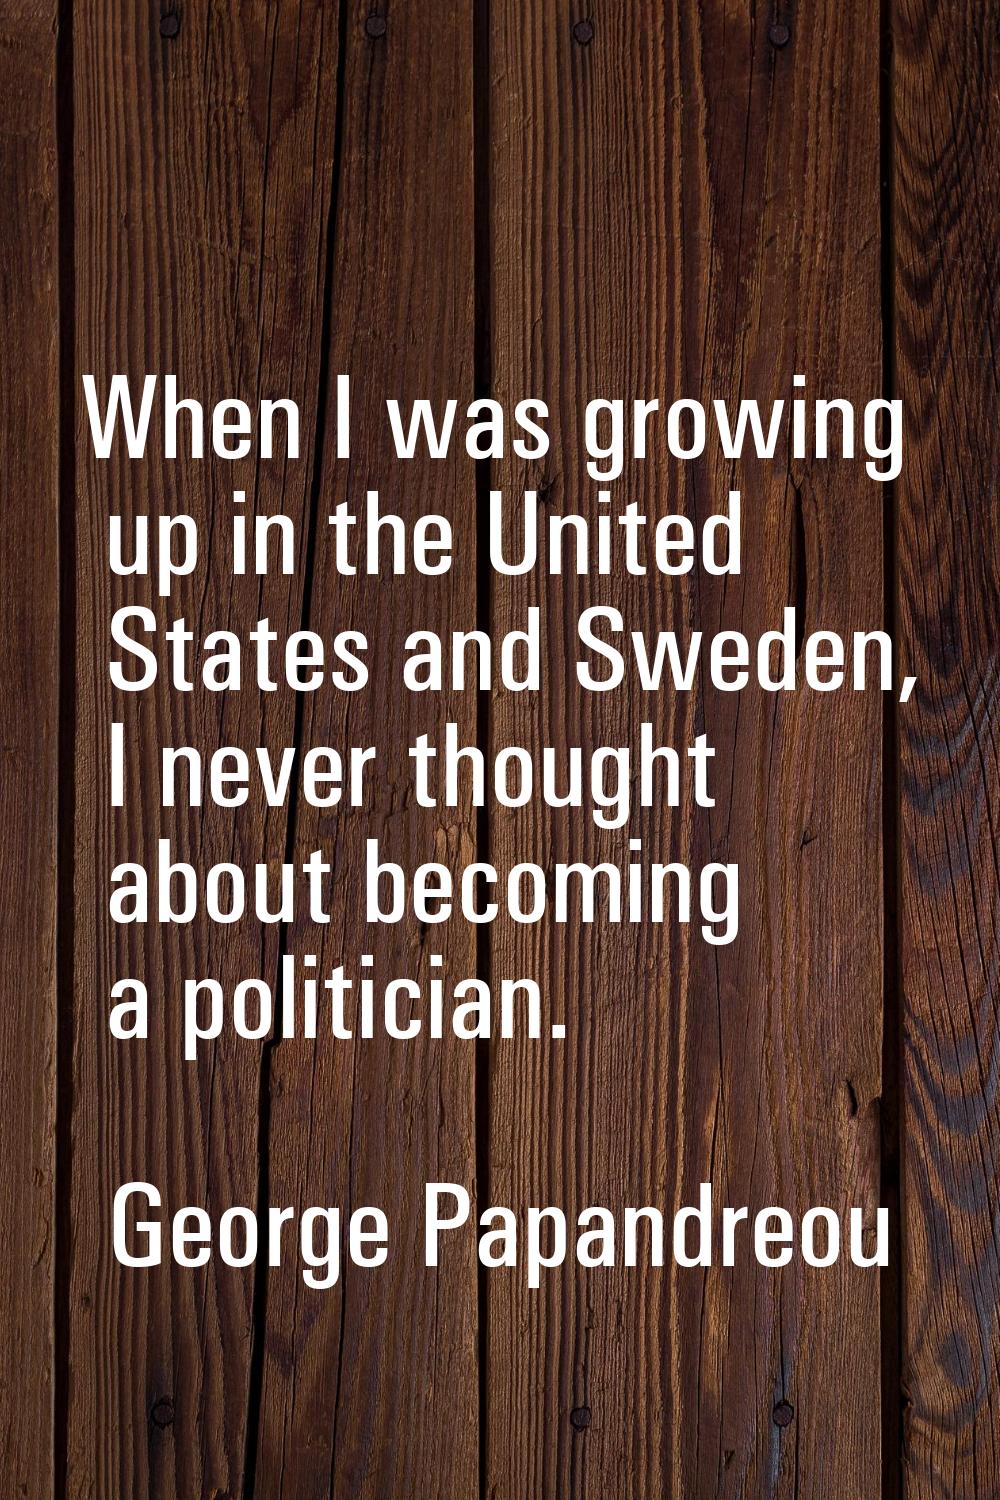 When I was growing up in the United States and Sweden, I never thought about becoming a politician.